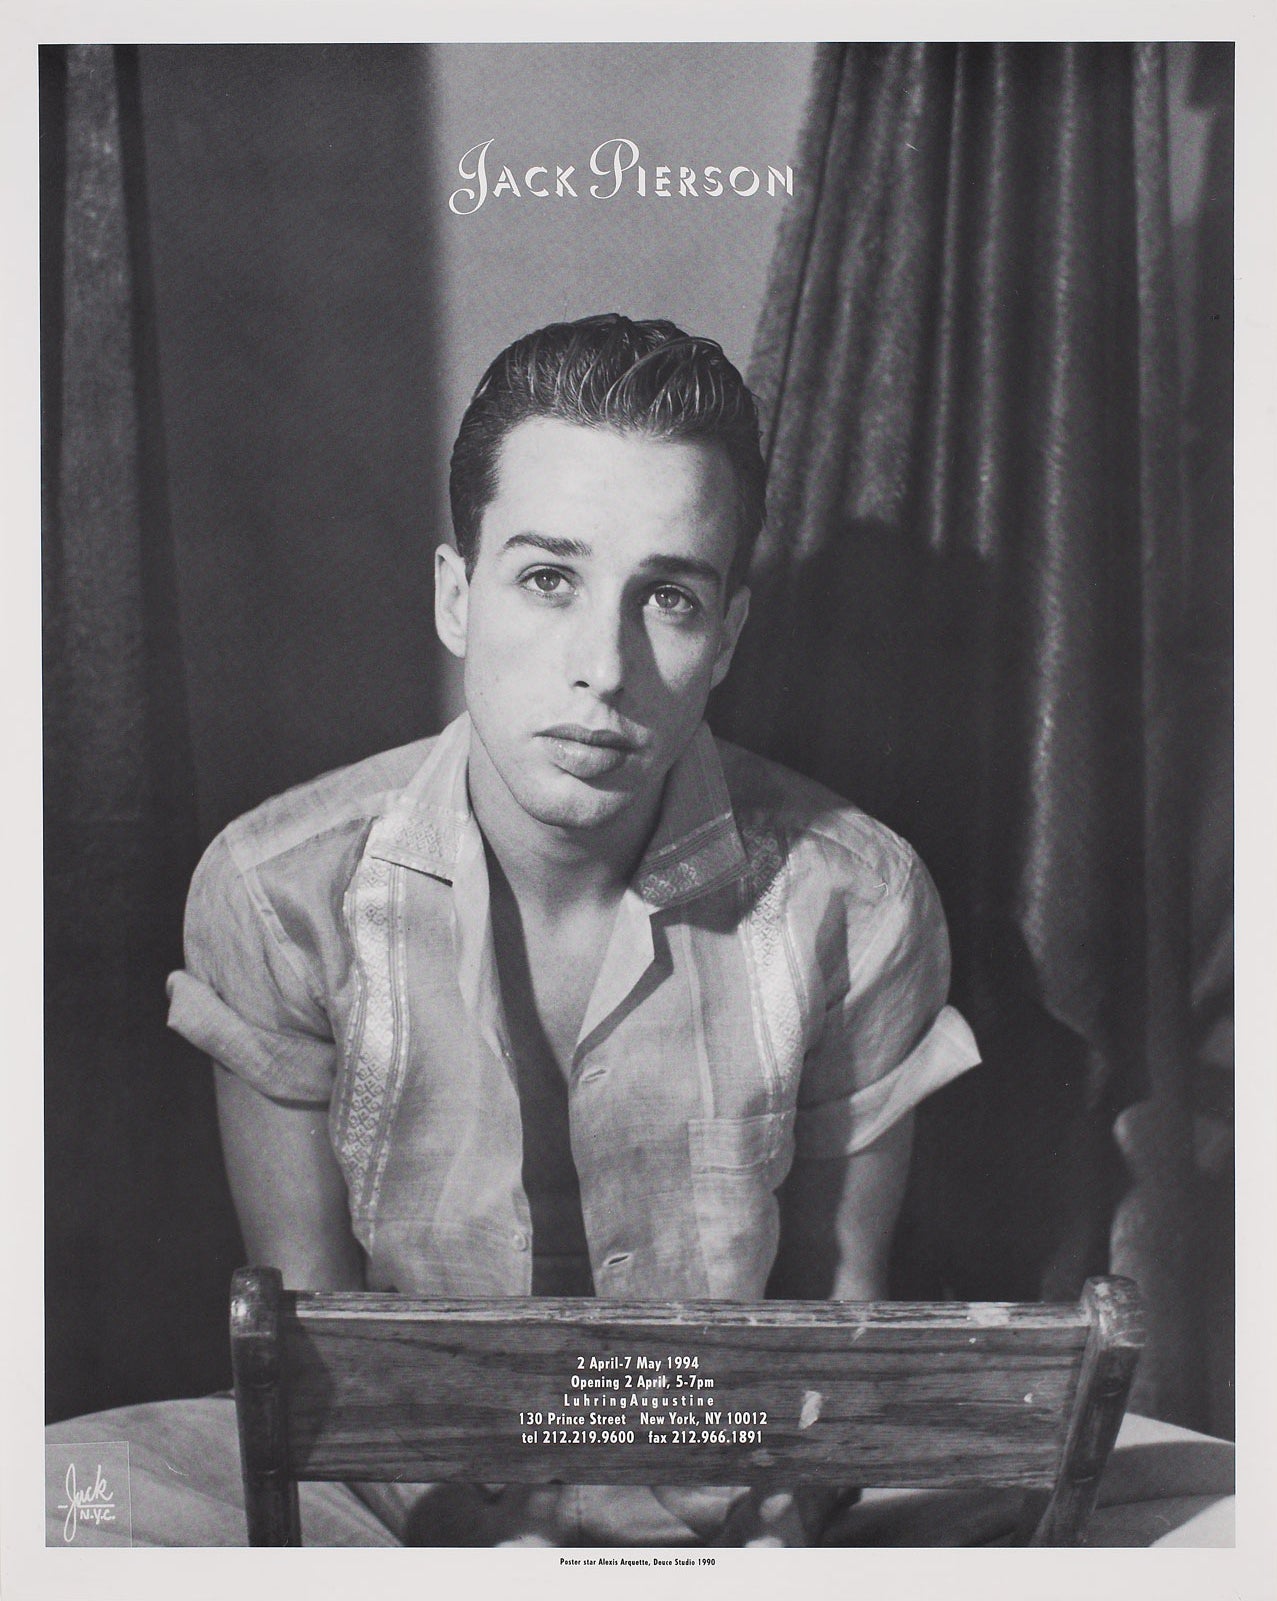 Poster from Jack Pierson's 1994 exhibition, featuring a black and white portrait. 